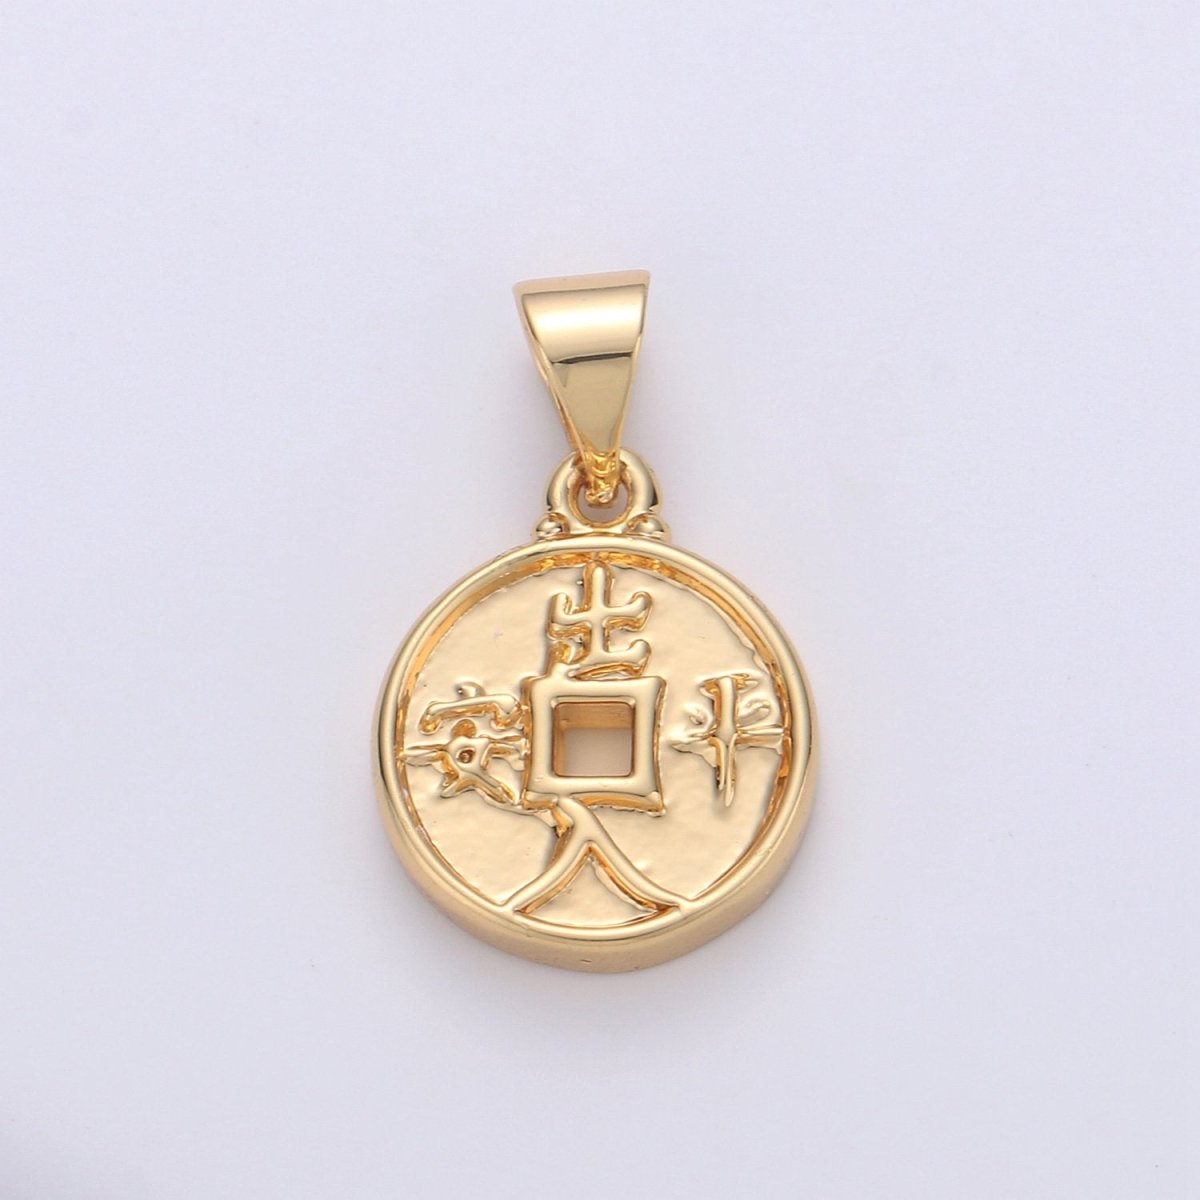 OS Double Sided Chinese Coin Charms, Dynasty, Lucky Coin Charm, Gold Chinese Coin in 24K Gold Filled Pendant For Jewelry Making I-869 - DLUXCA